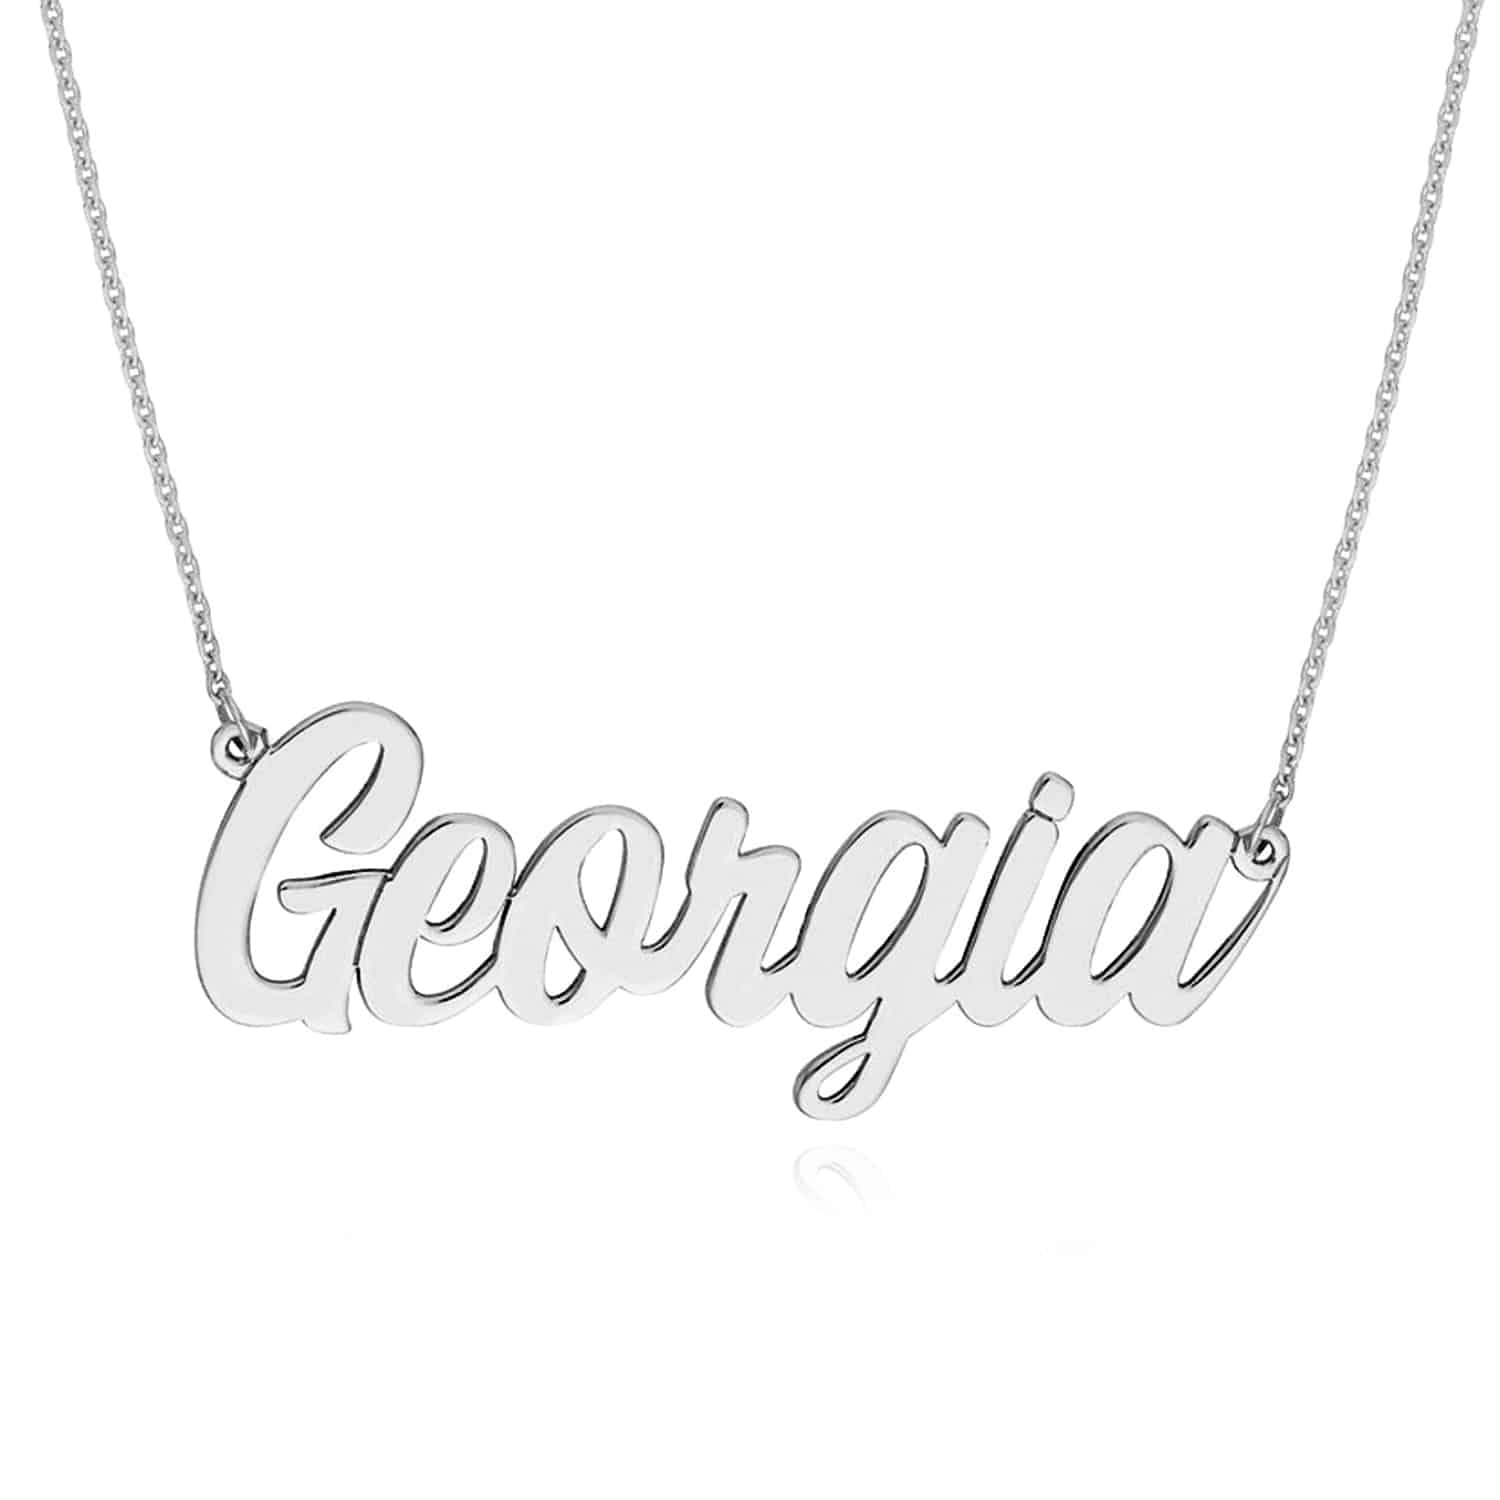 Customizable 14K Gold Yellow White Rose Script Font Nameplate Pendant Necklace - White Gold, 16"-18" Adjustable